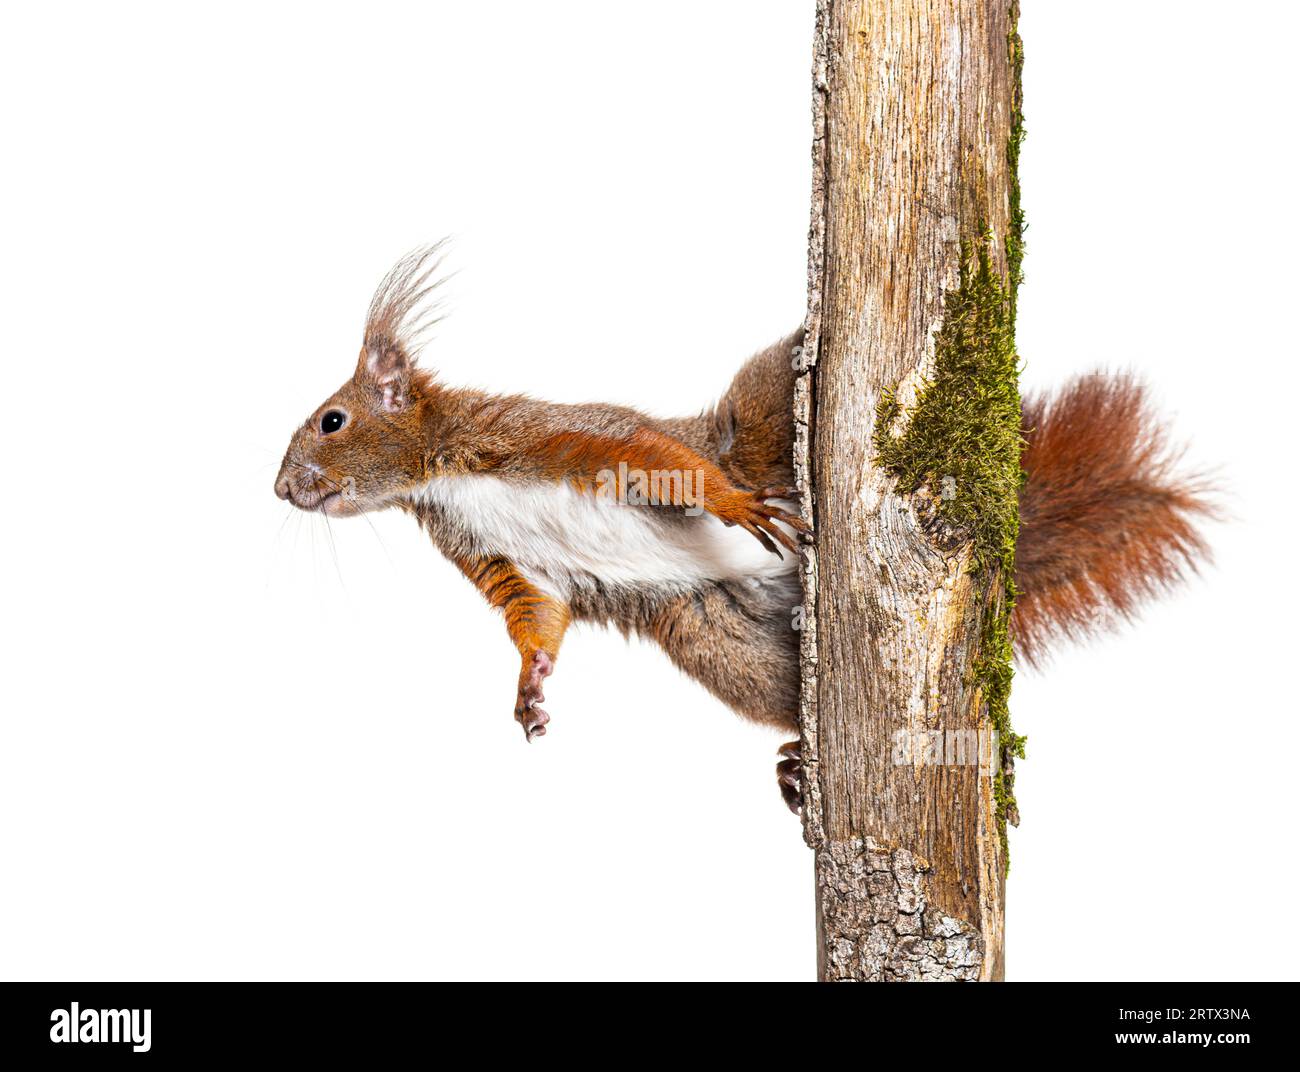 Eurasian red squirrel climbs a tree branch by clinging to the bark with its claws, sciurus vulgaris, isolated on white Stock Photo